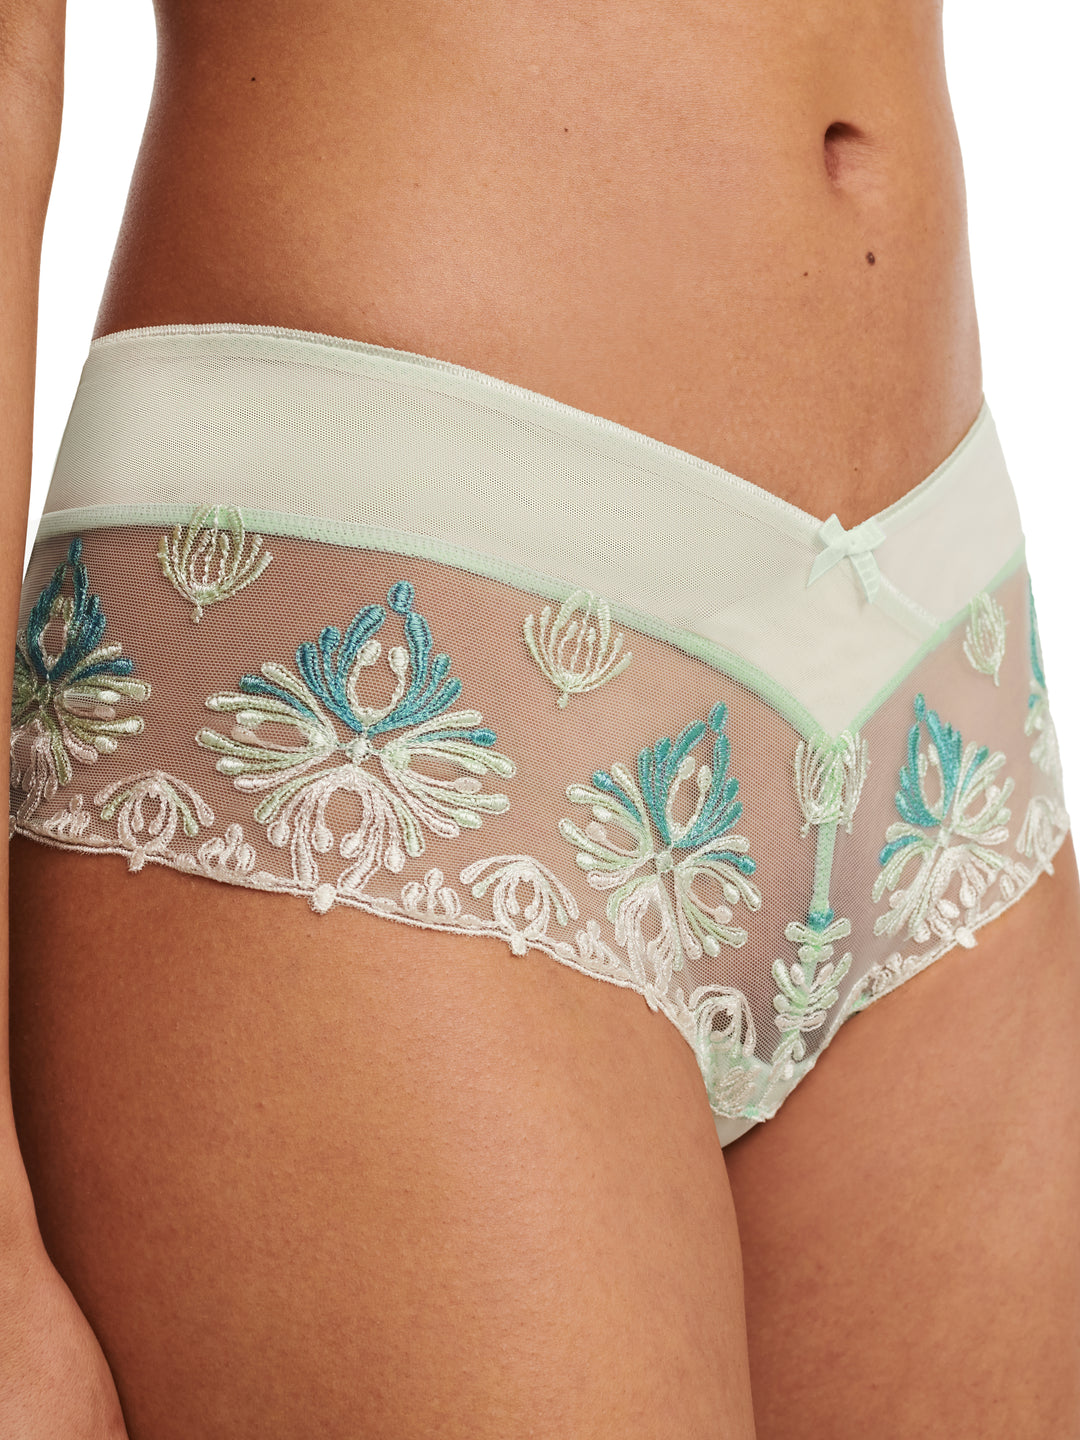 Chantelle - Champs Elysees Shorty Verde Giglio Multicolor